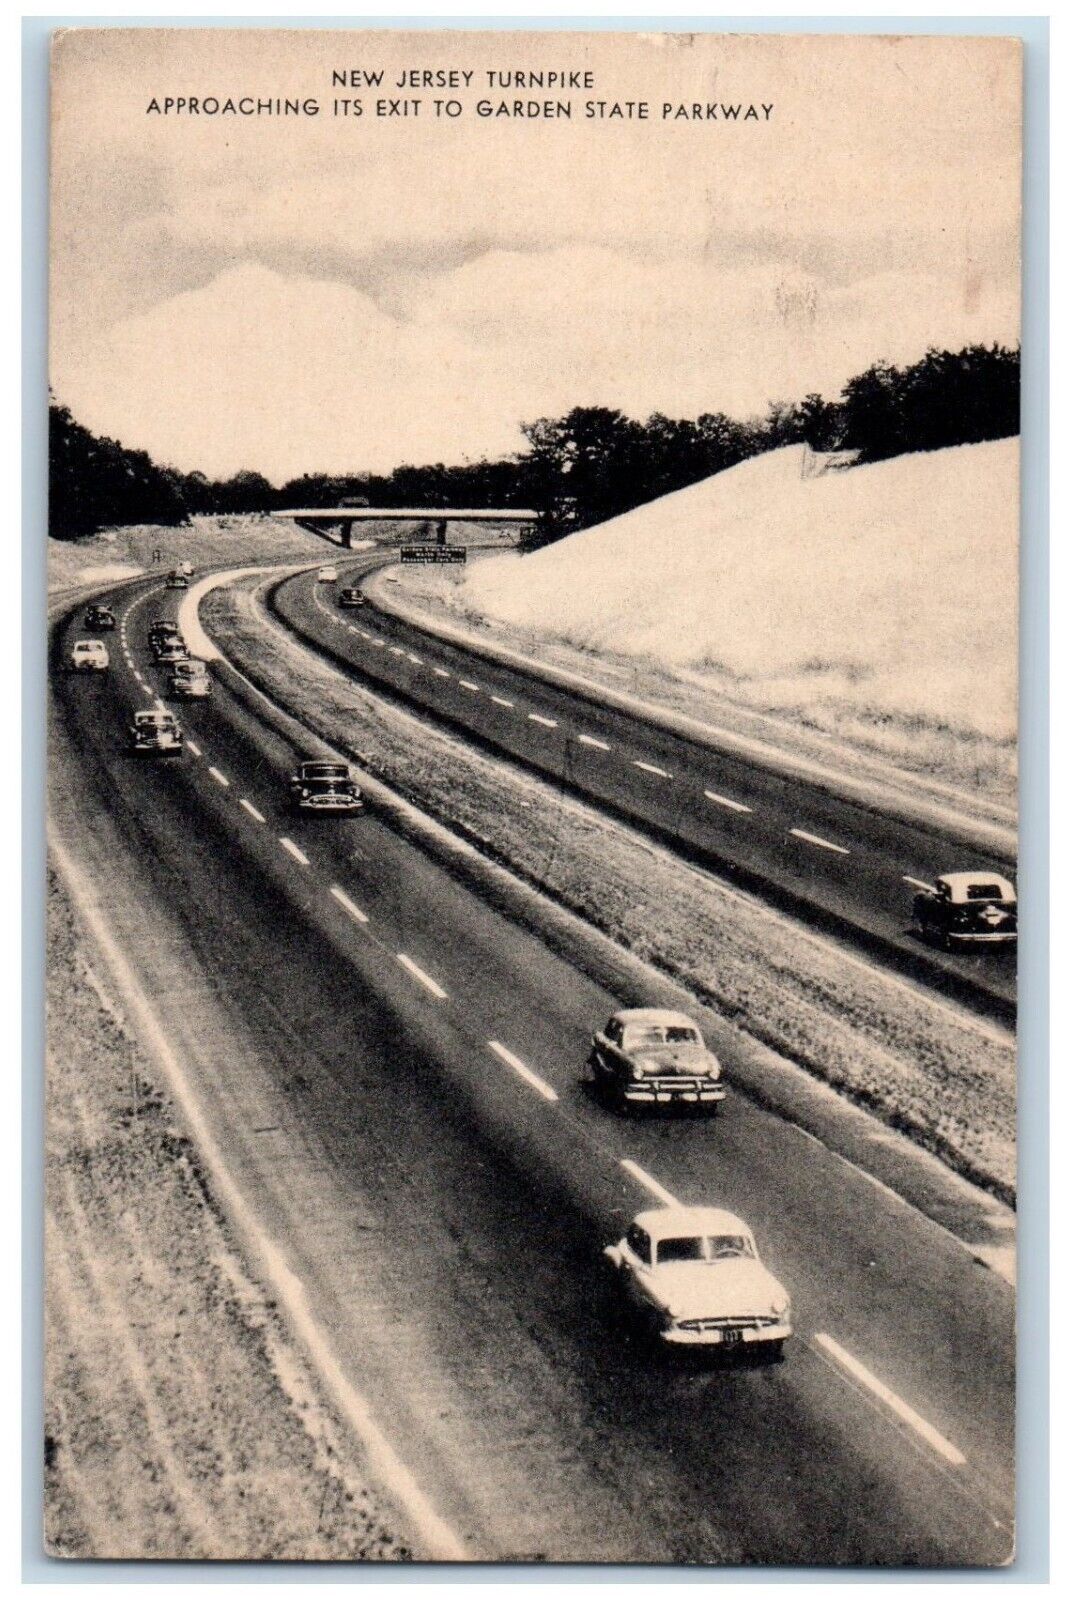 1959 New Jersey Turnpike Approaching Garden  State Parkway Paterson NJ Postcard